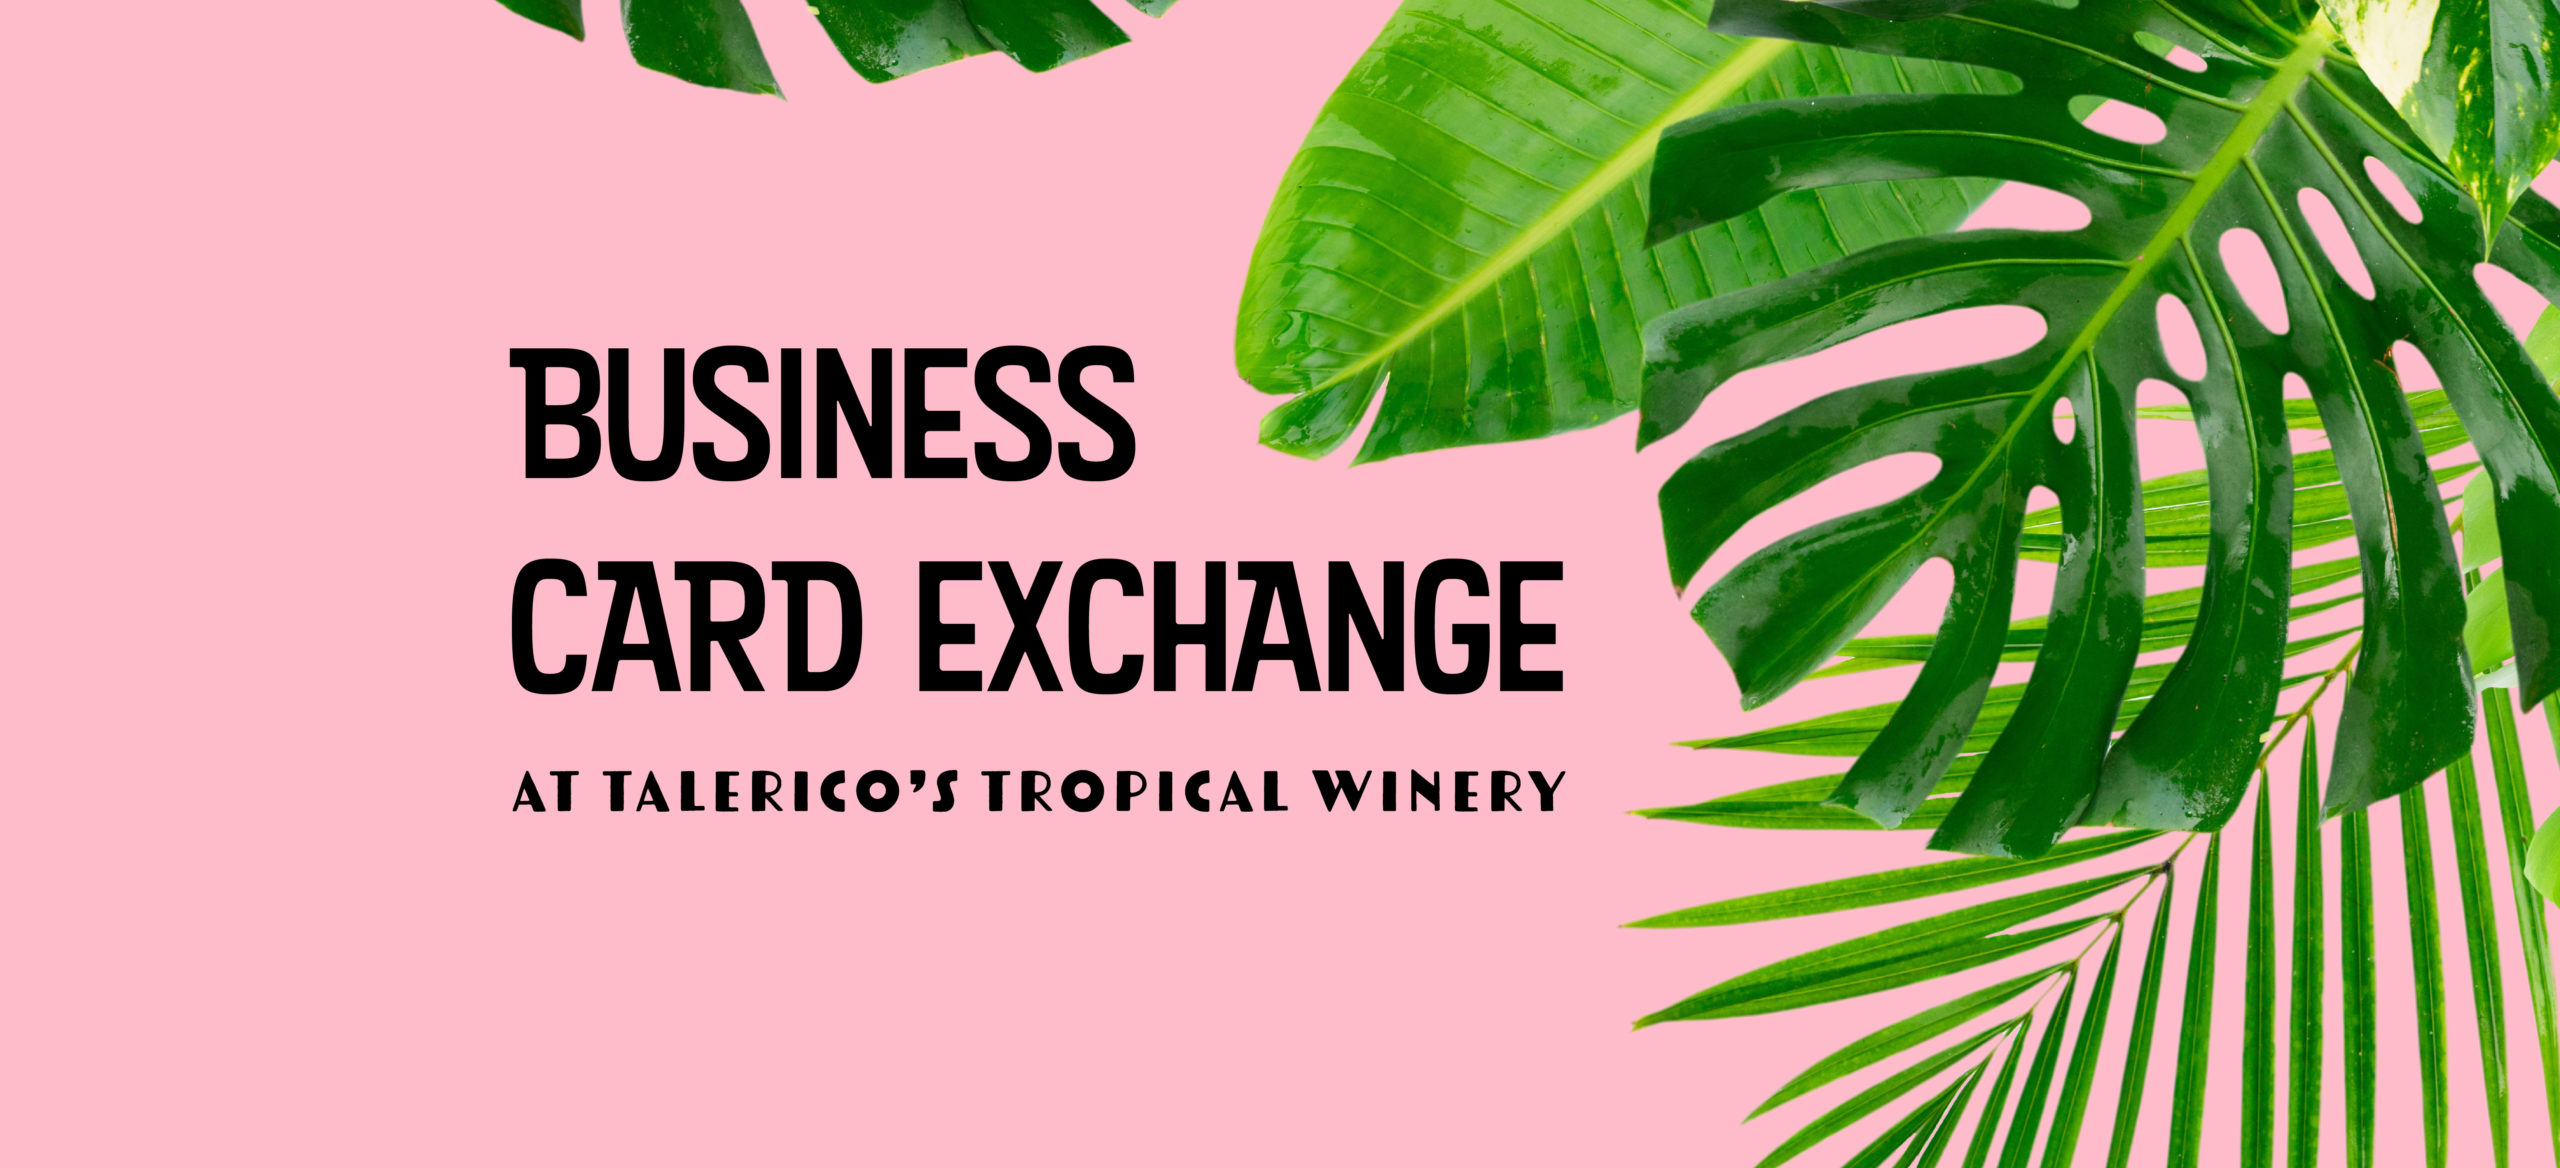 Business Card Exchange at Talerico’s Tropical Winery